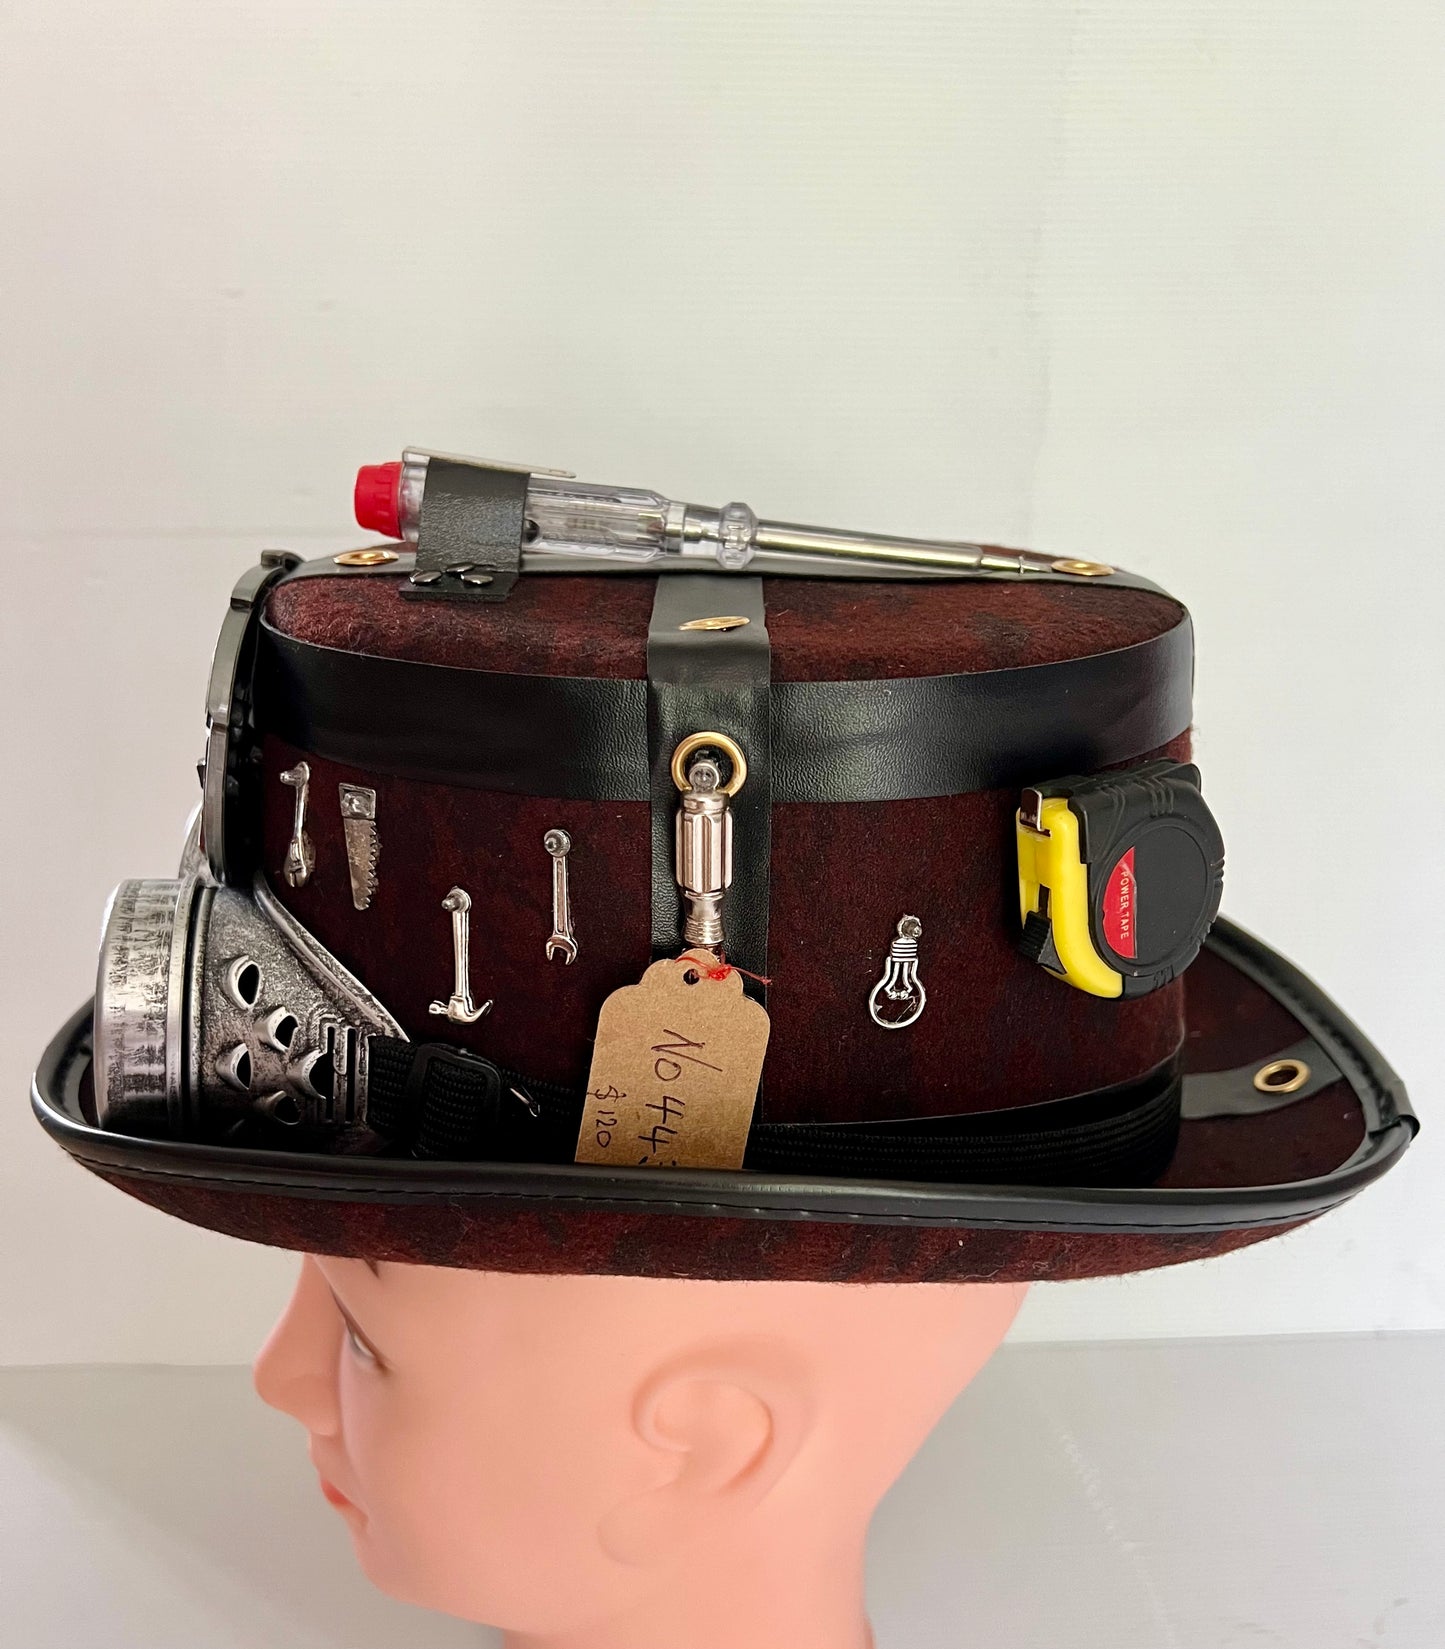 Steampunk Style (Electrician Theme)Hat with Goggles (Item #443)